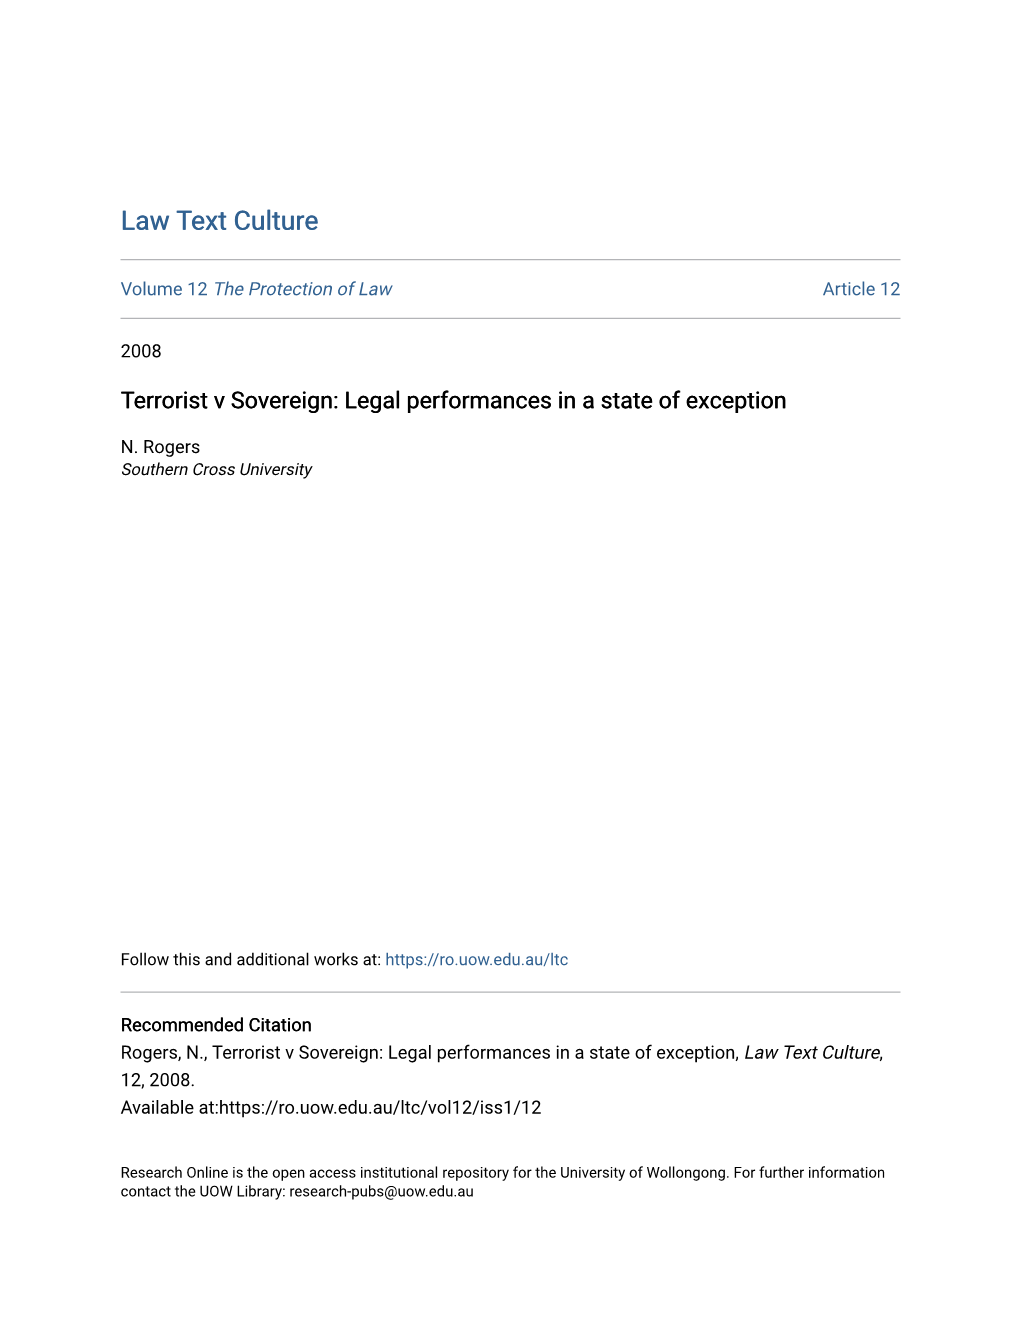 Terrorist V Sovereign: Legal Performances in a State of Exception